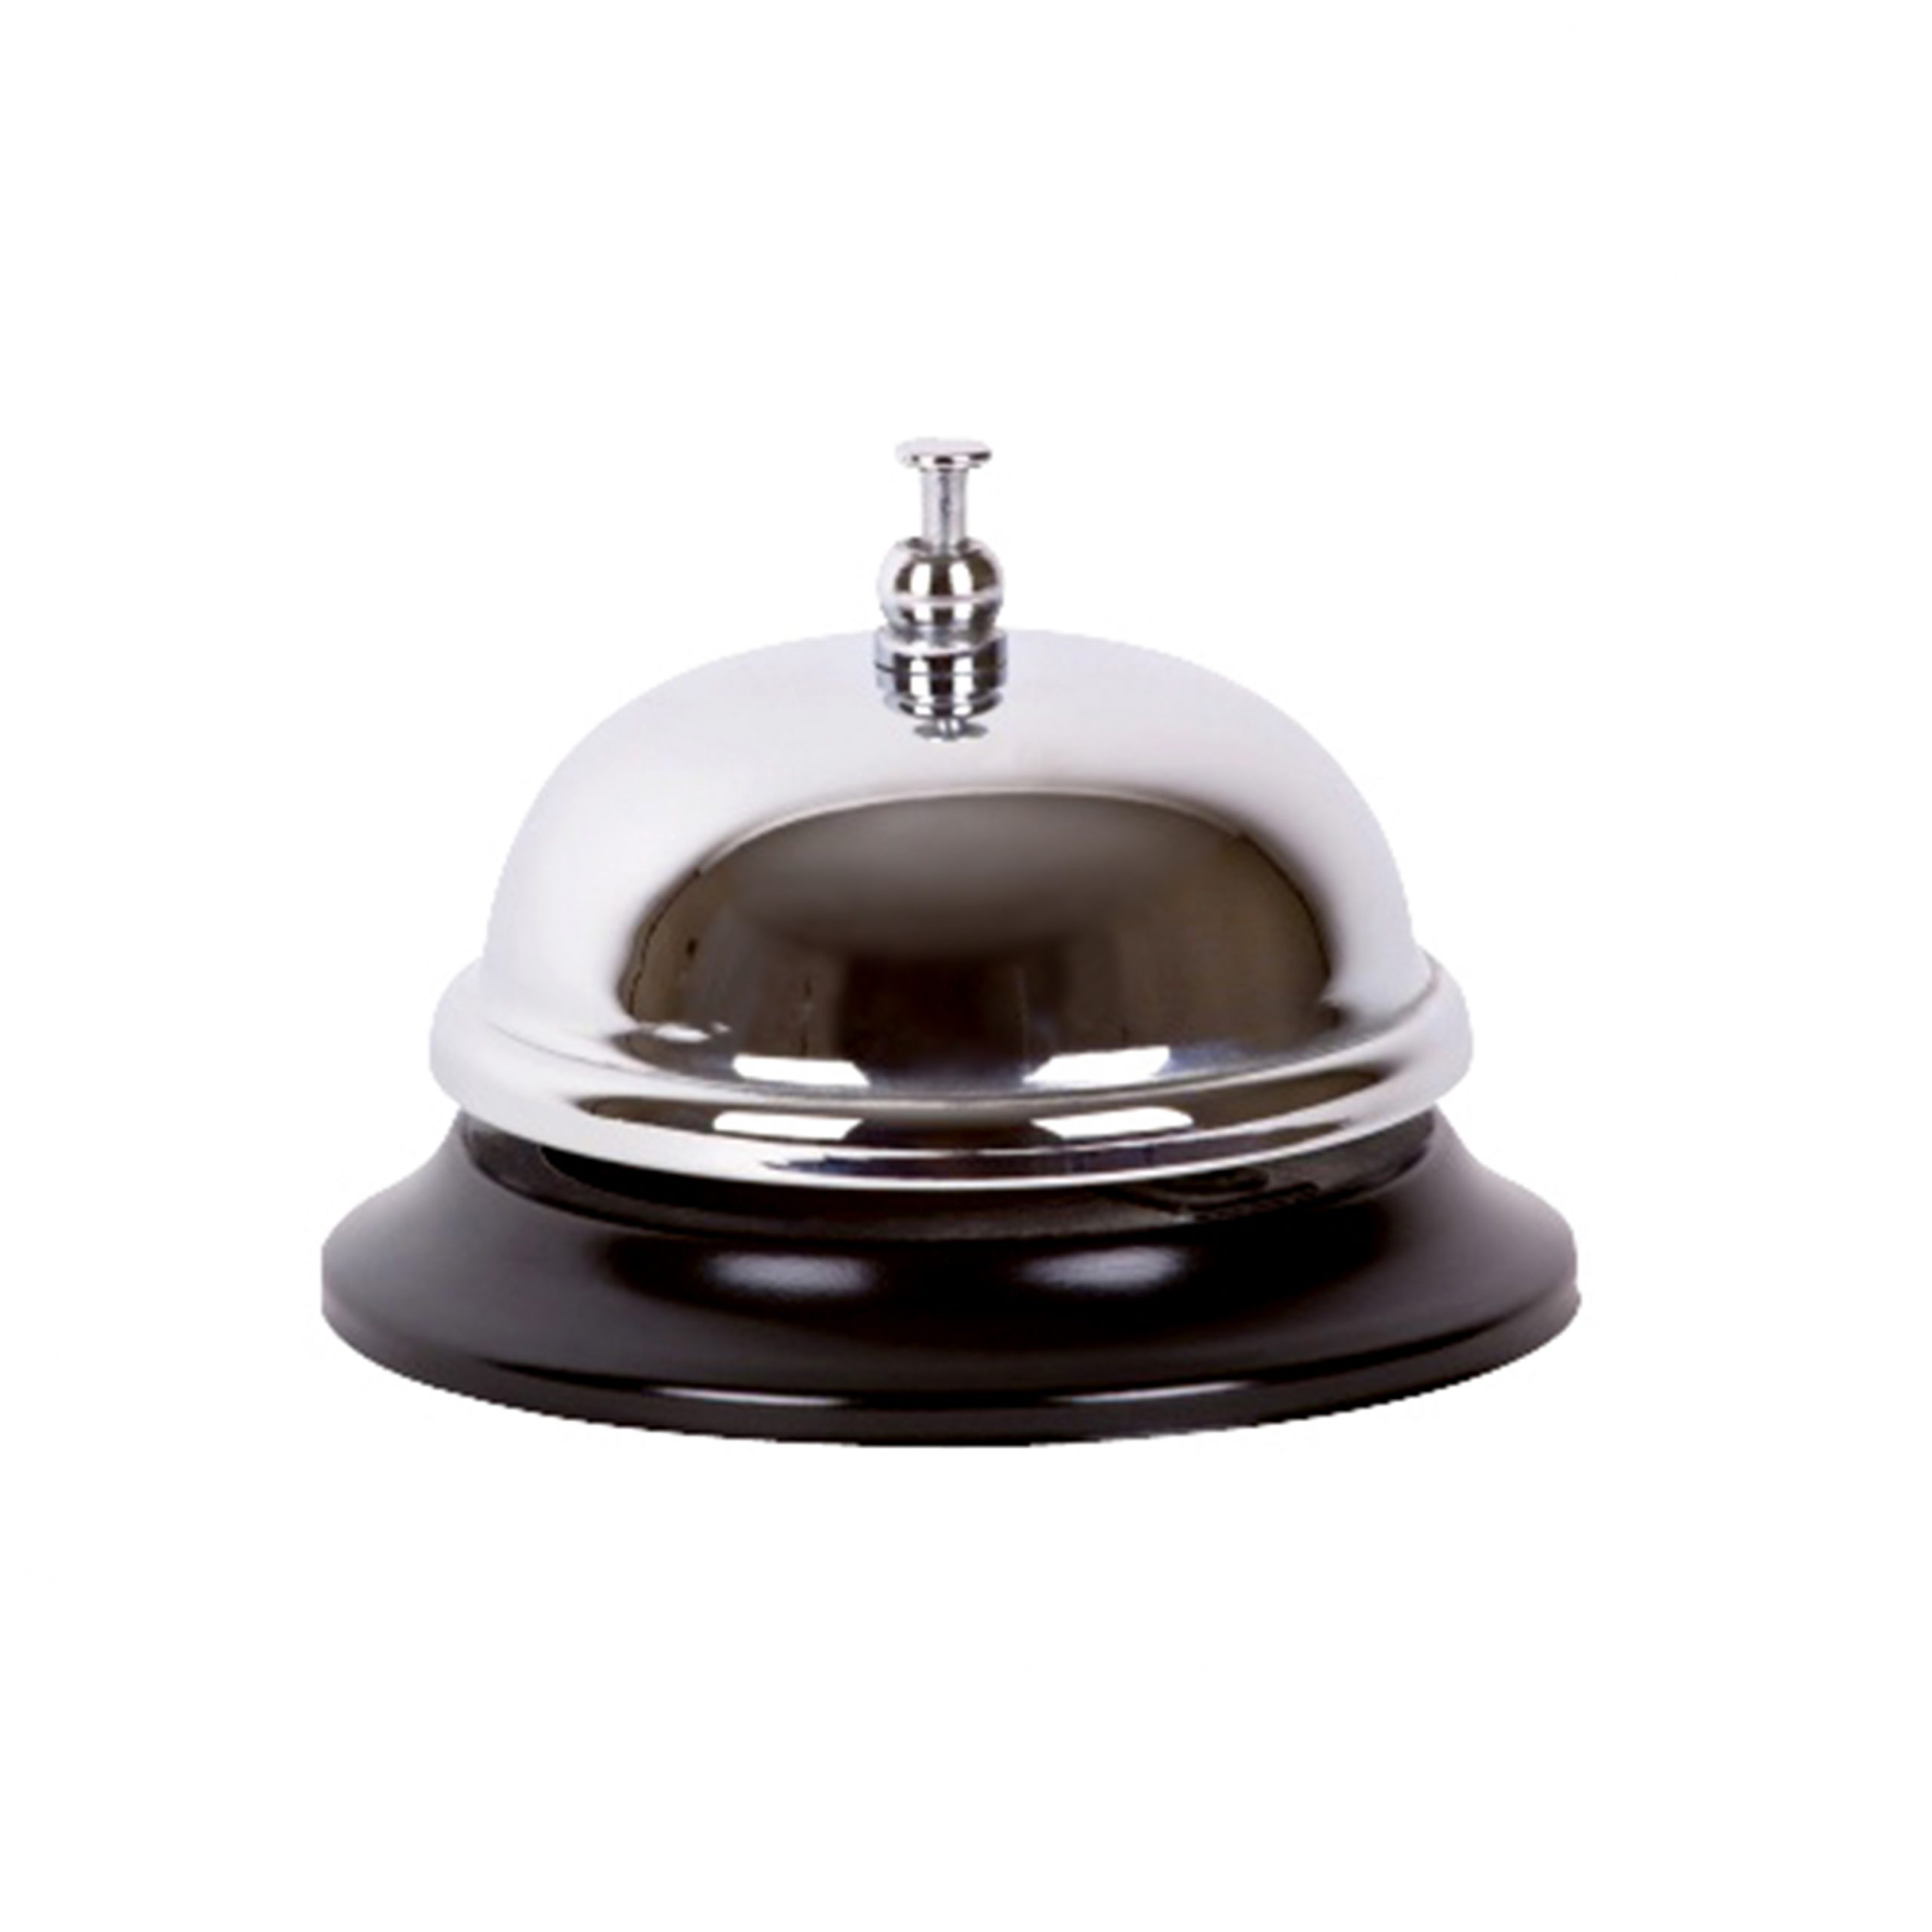 HBW Manual Call Bell for Office Restaurant